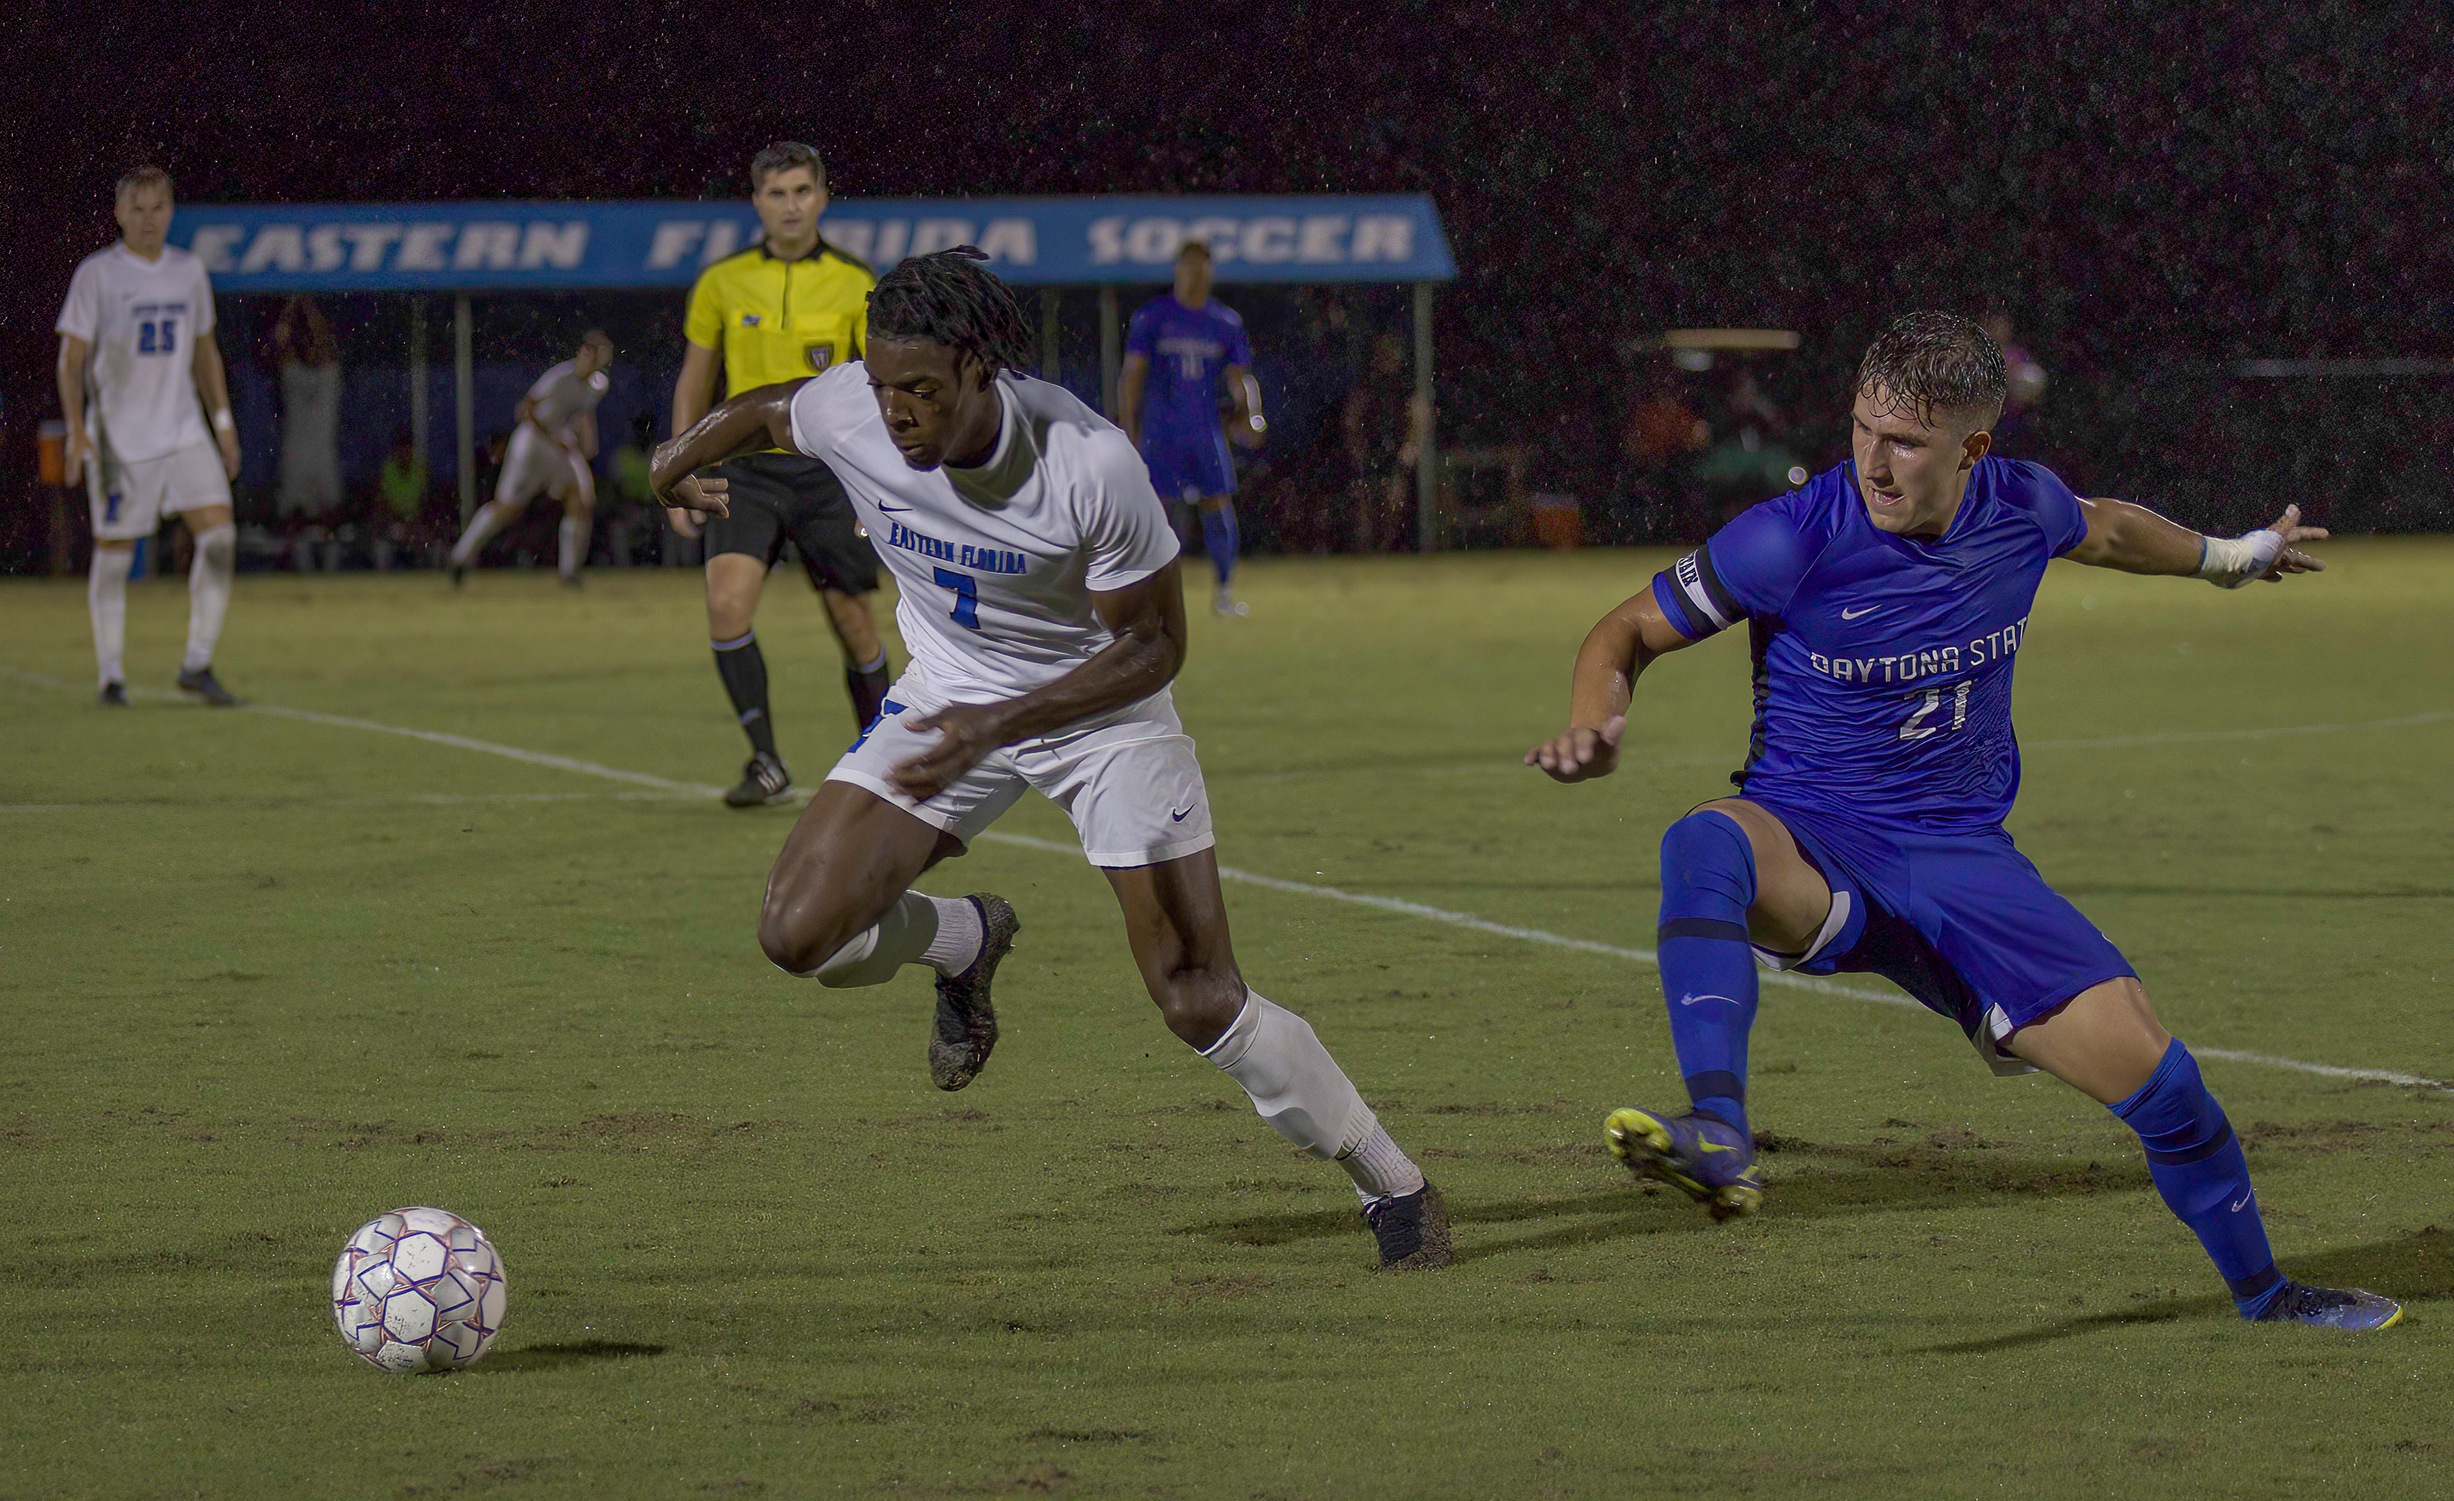 #4 Men’s Soccer has first loss of the season to #20 Eastern Florida